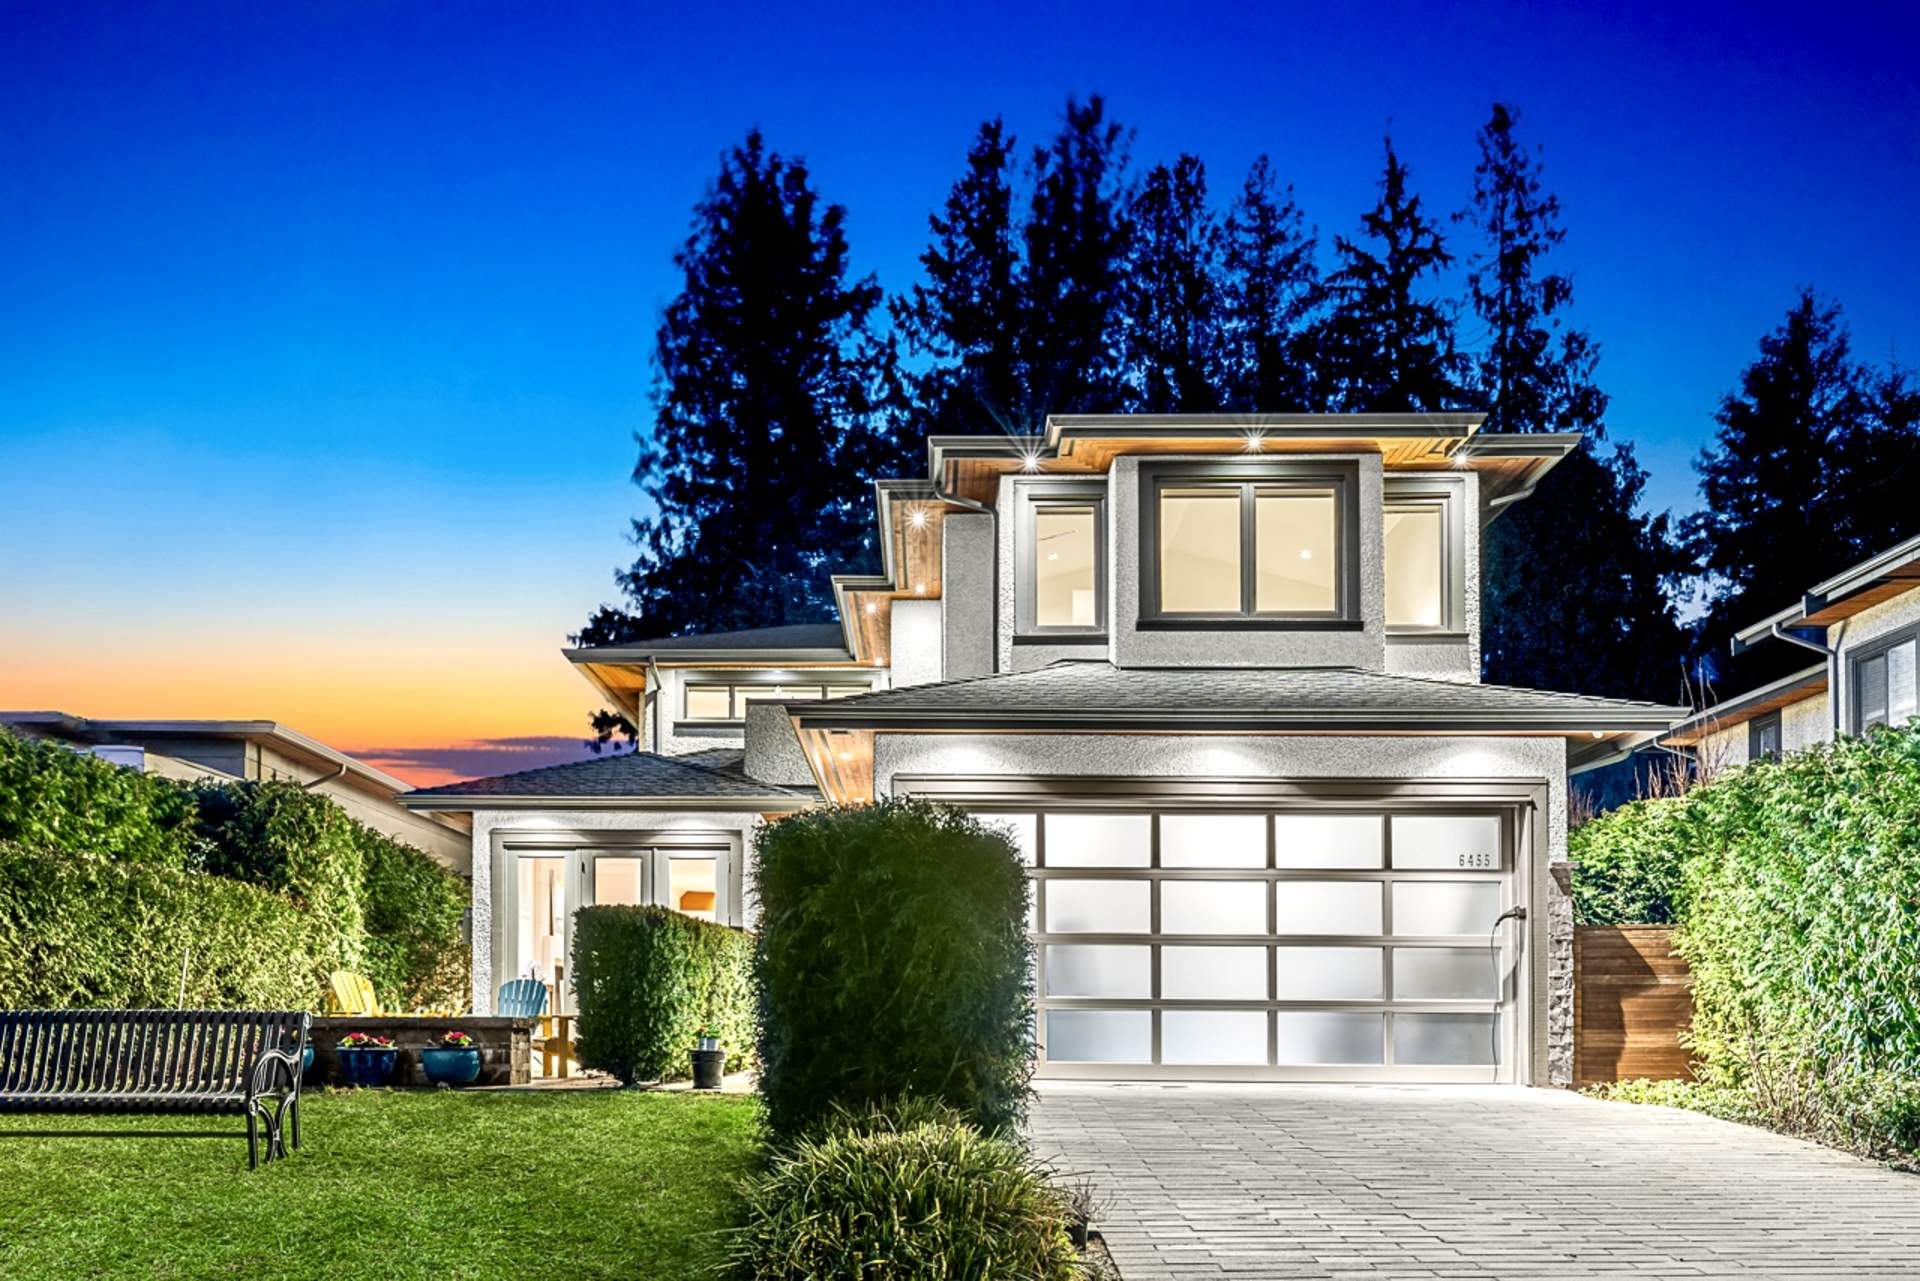 Exquisitely designed and constructed home in Gleneagles overlooking breathtaking ocean and island views! 